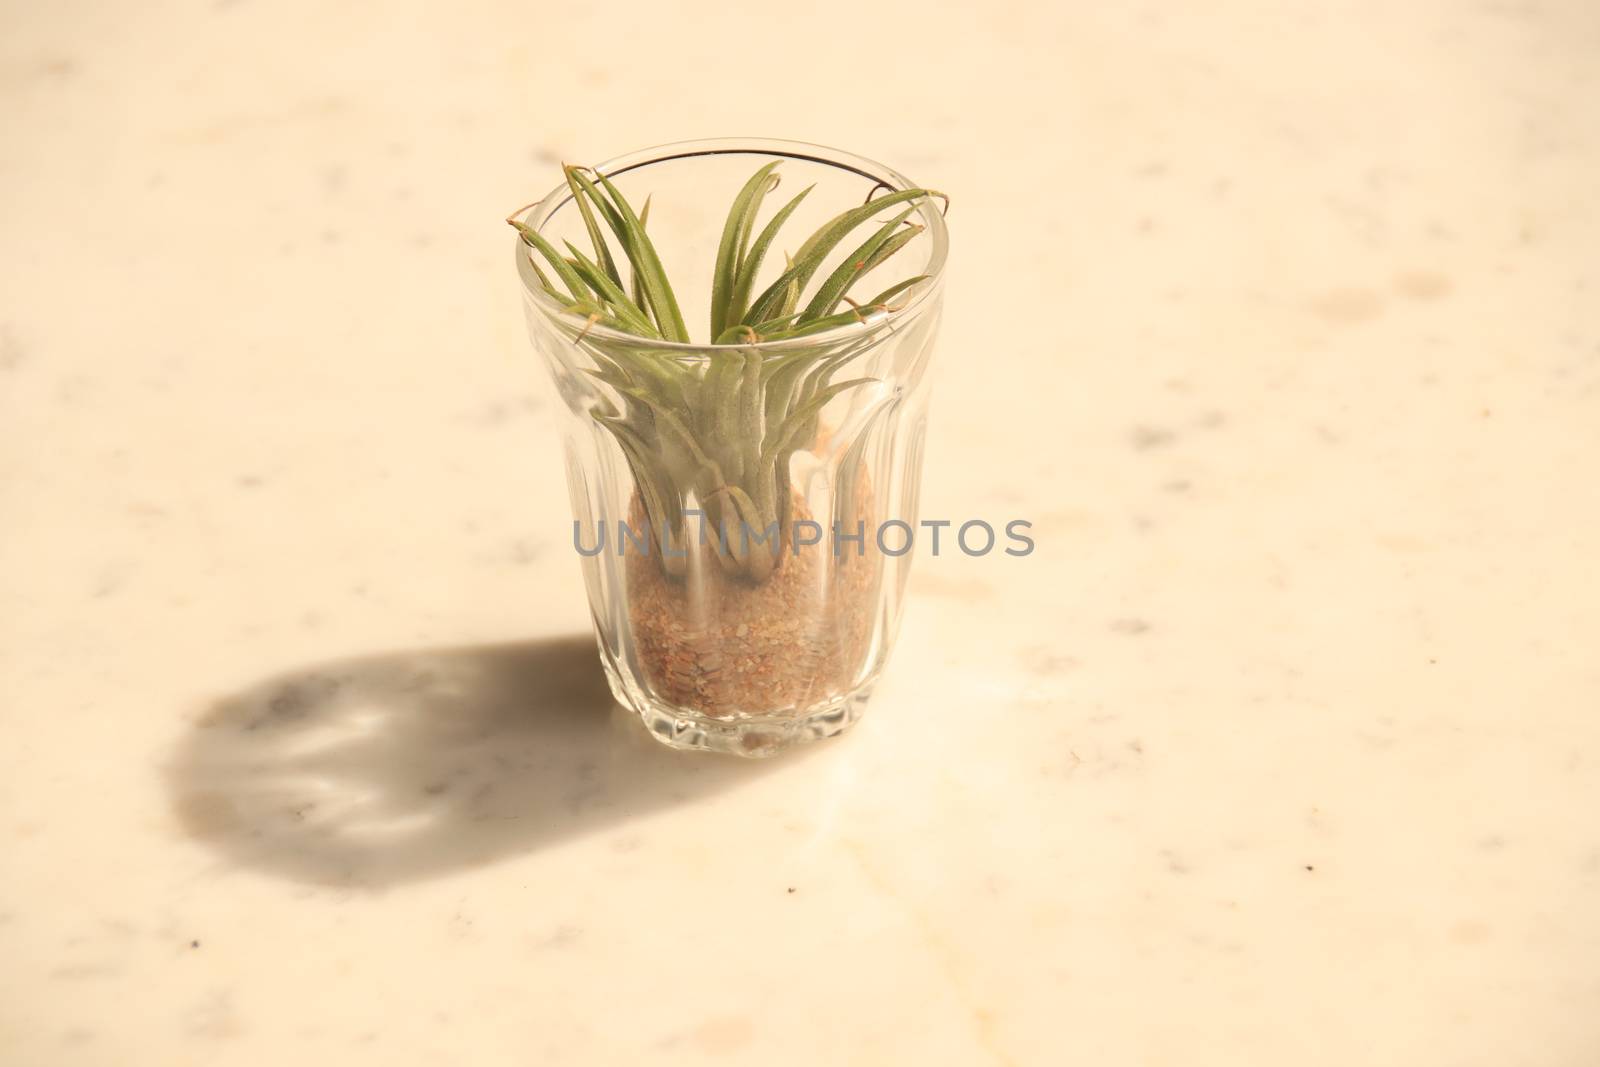 Tillandsia also called an air plant which is a popular houseplant decoration for Spring season or just home gardening